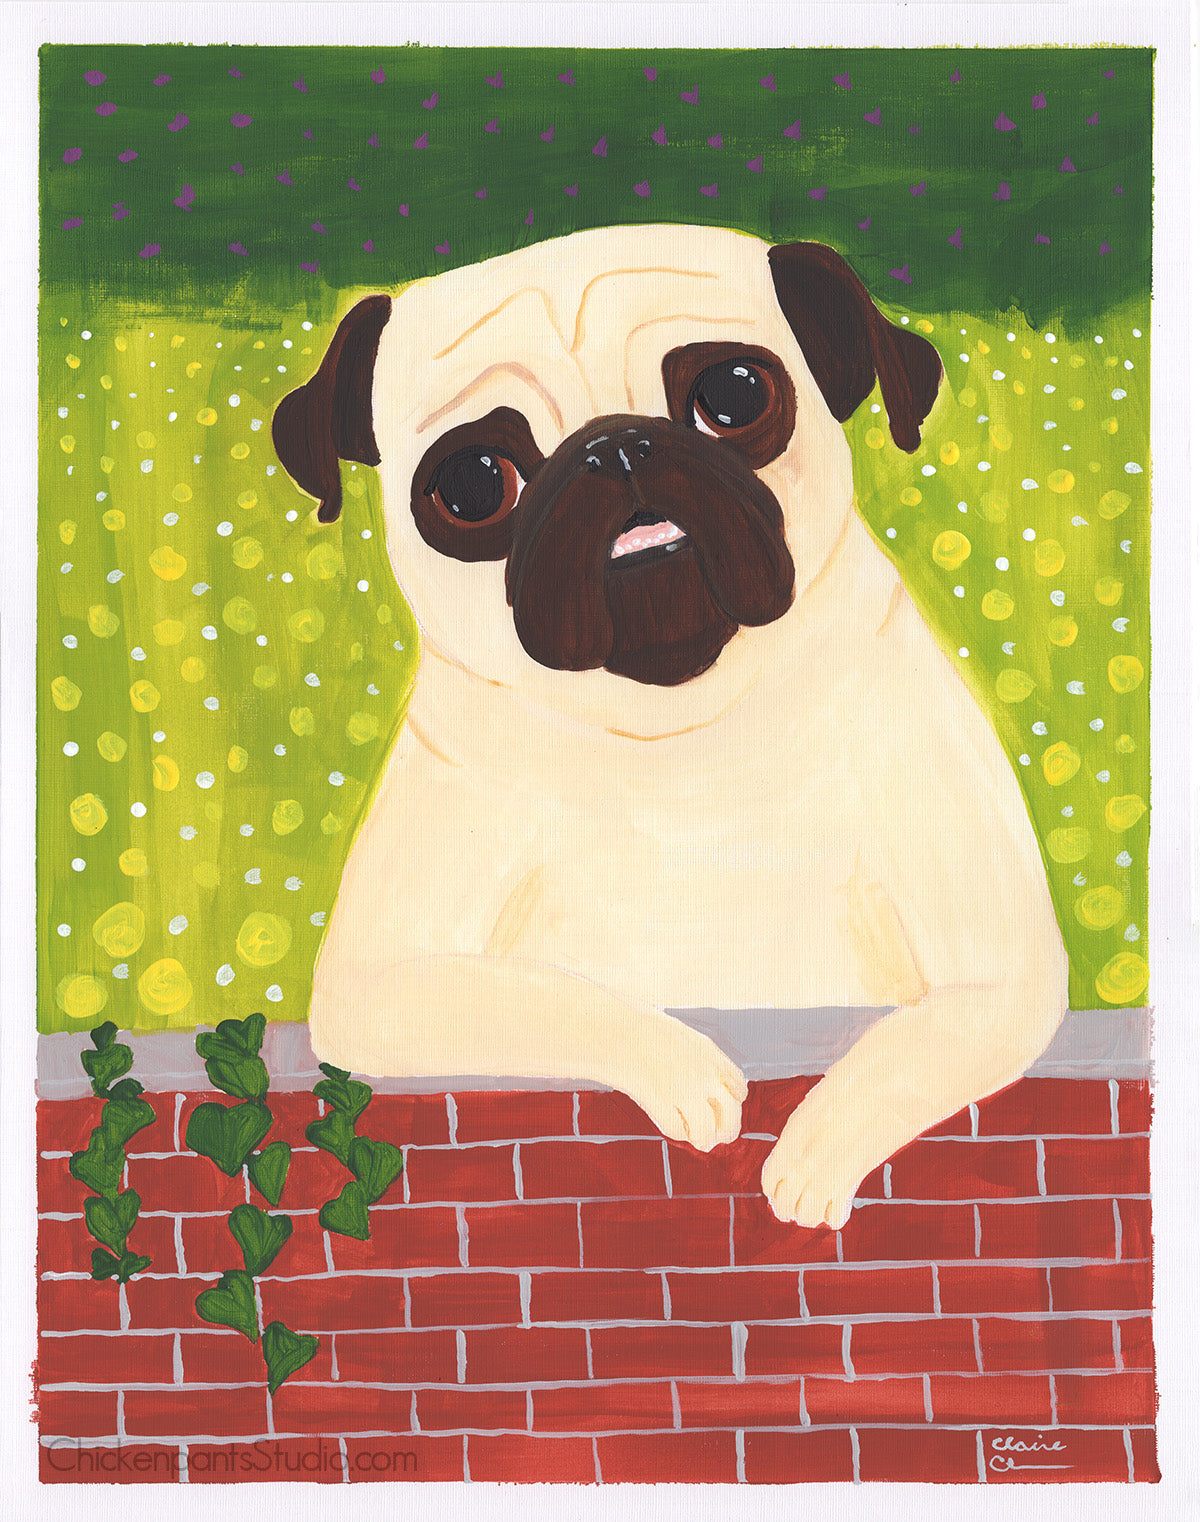 Over The Garden Wall - Original Pug Painting